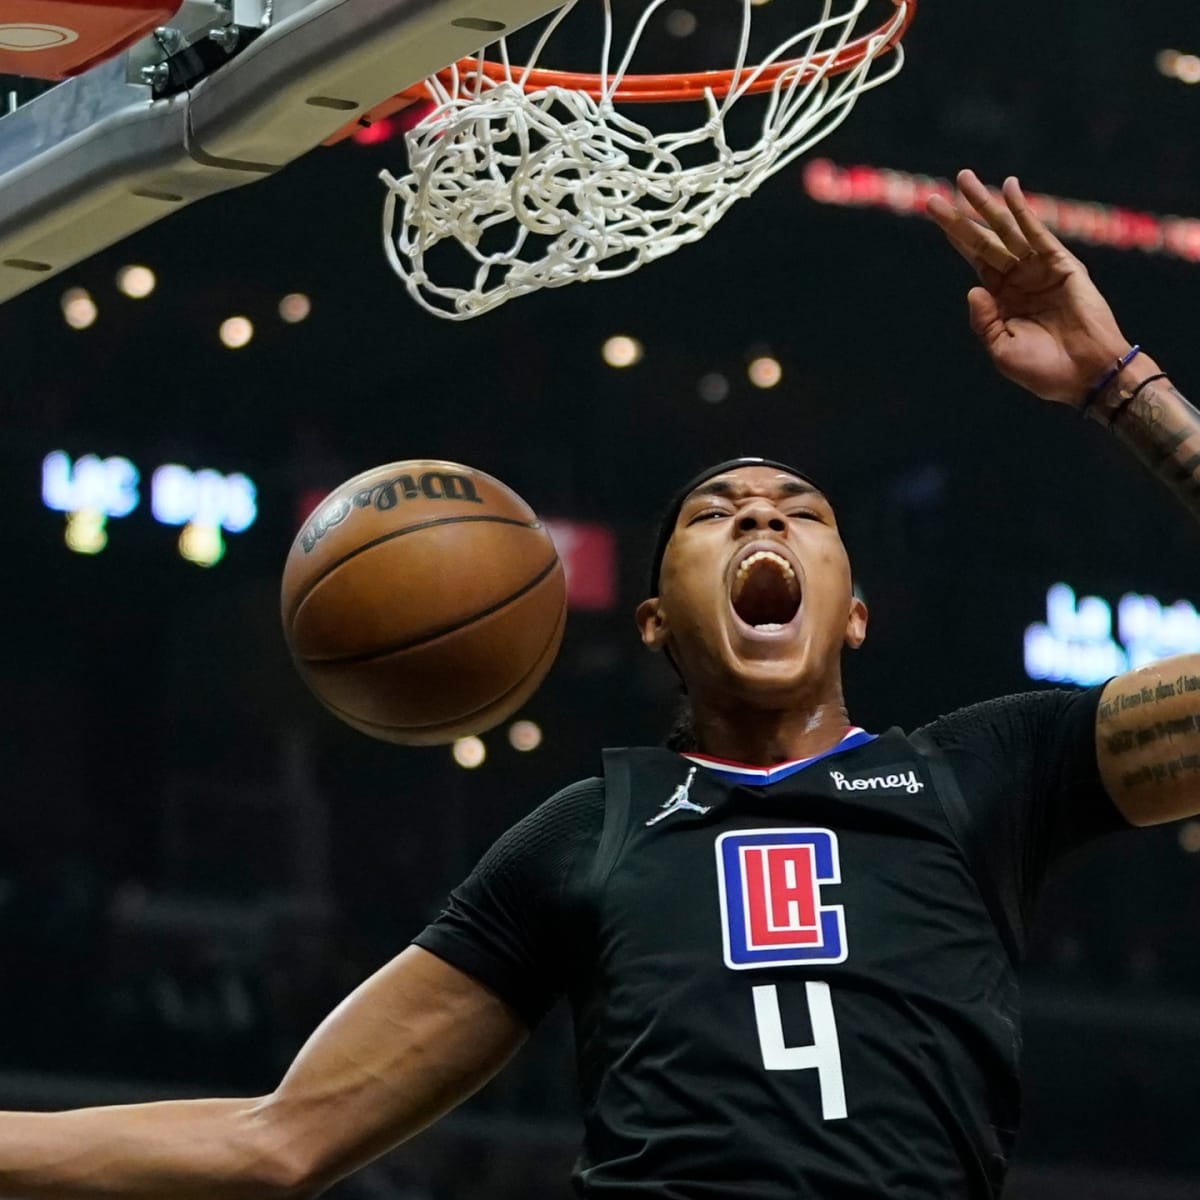 Clippers rookie Brandon Boston Jr. eager to put on a show - 247 News Around  The World